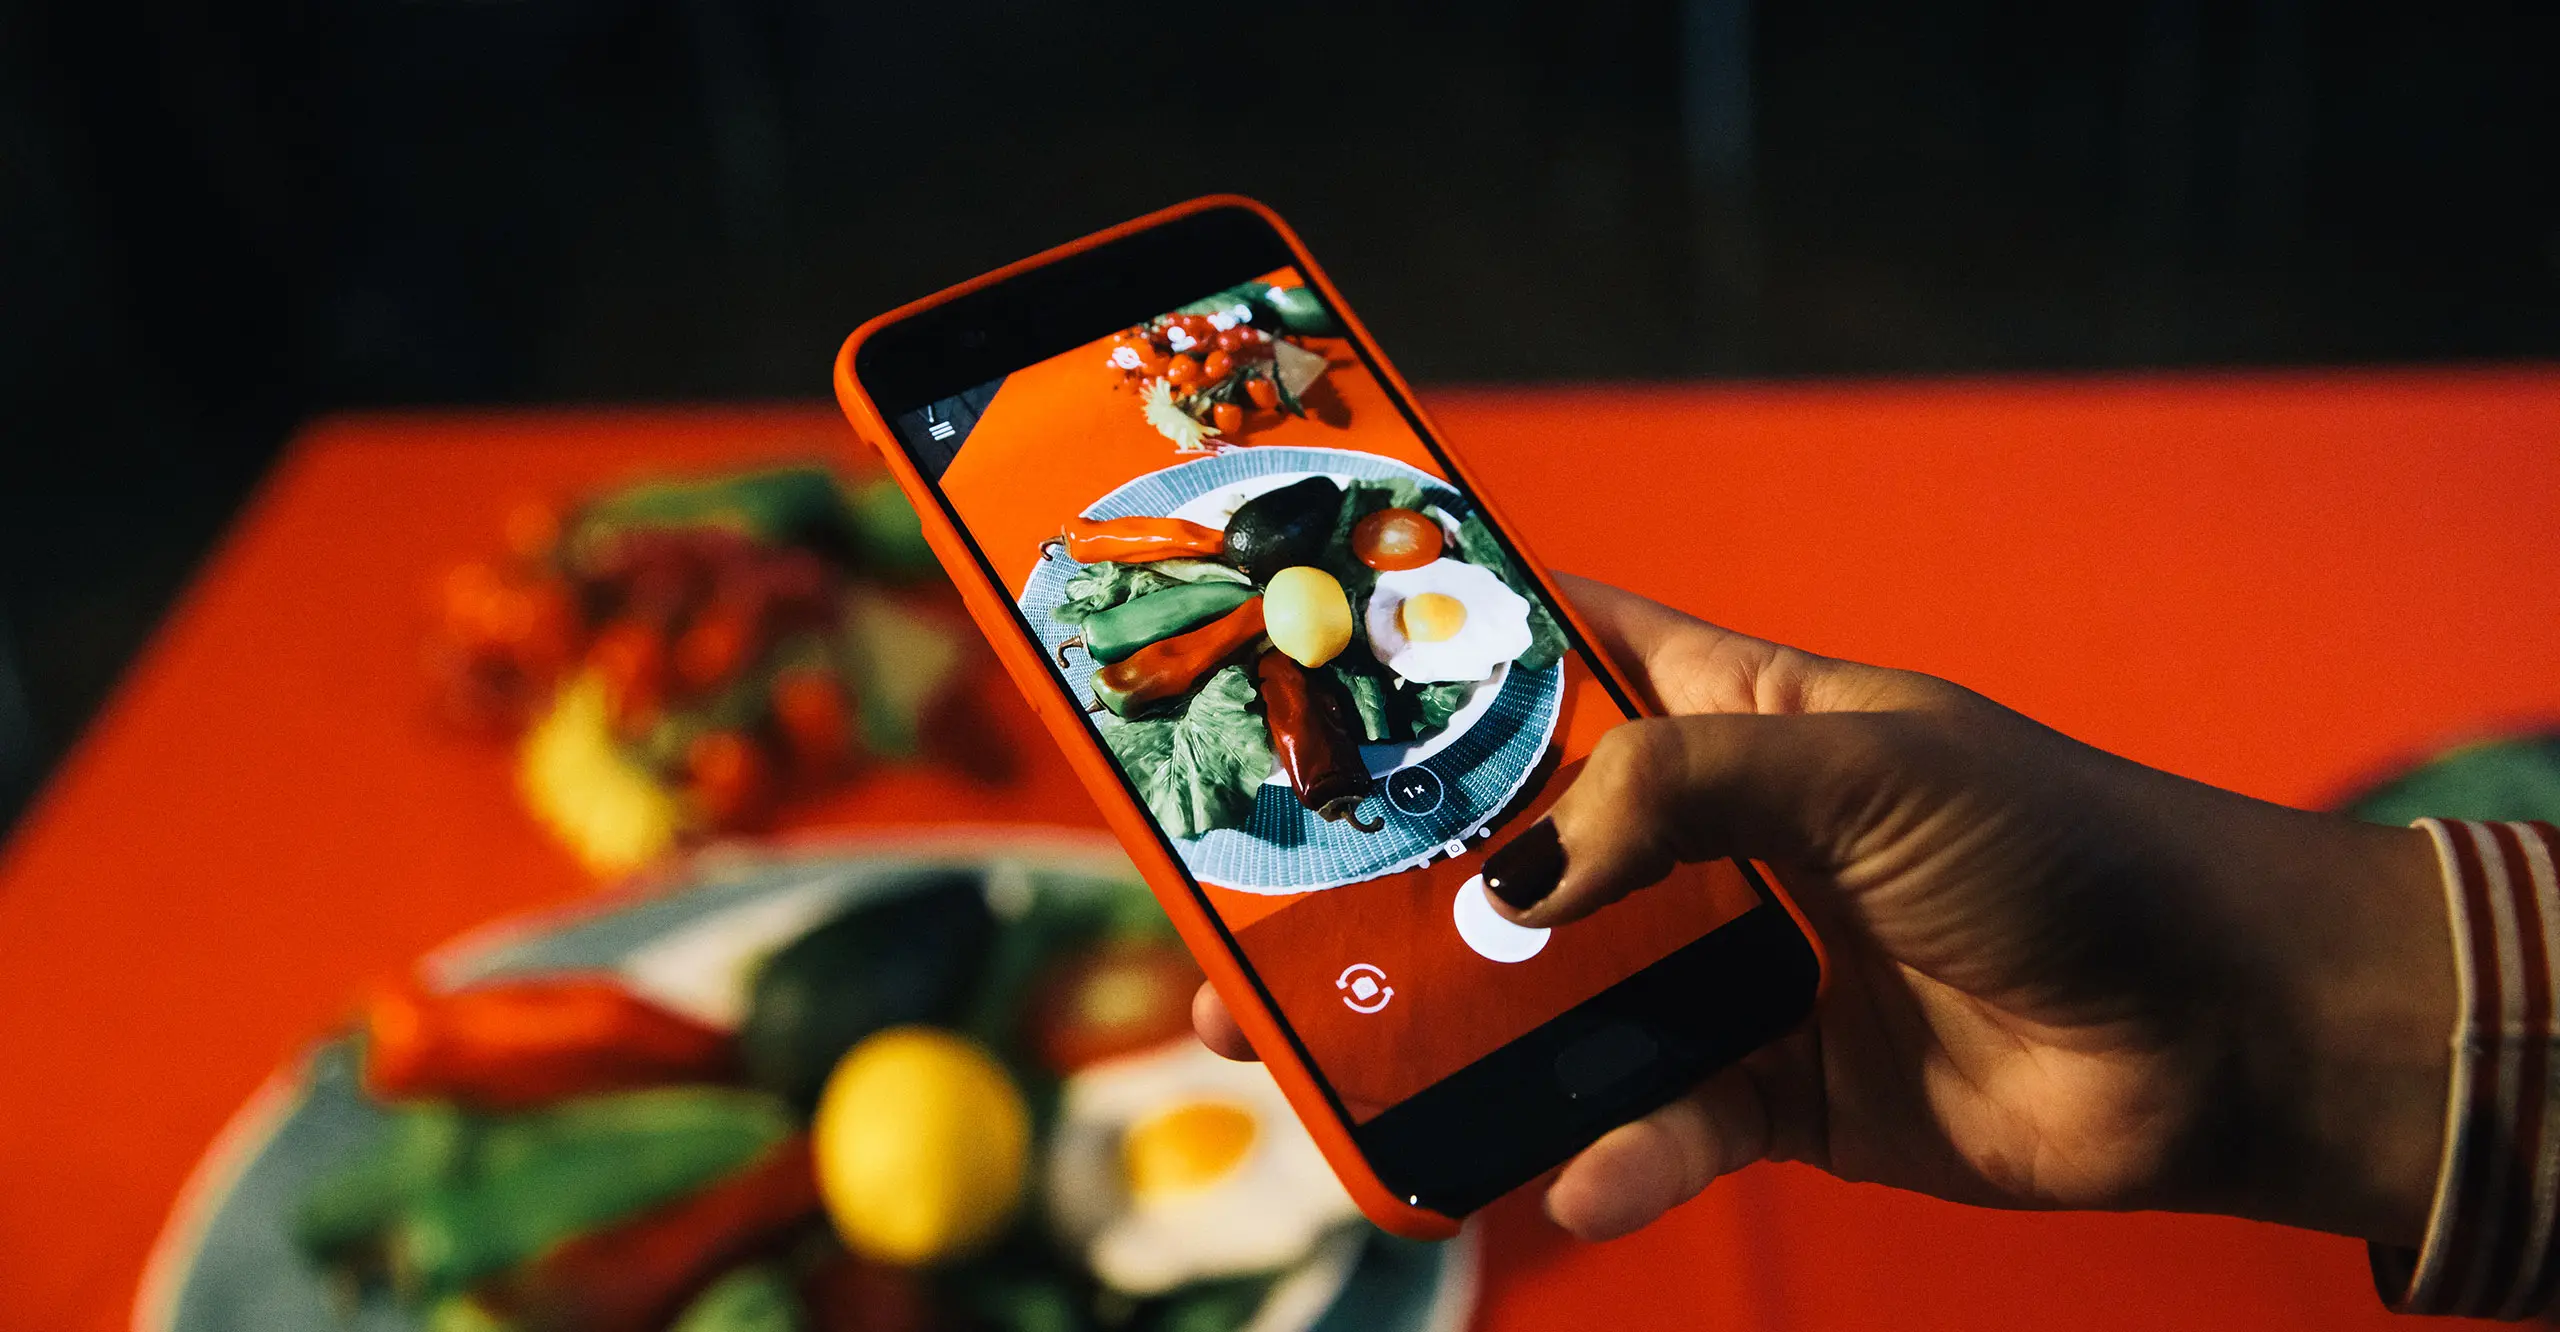 A person takes a photo of a plate of food using a mobile phone